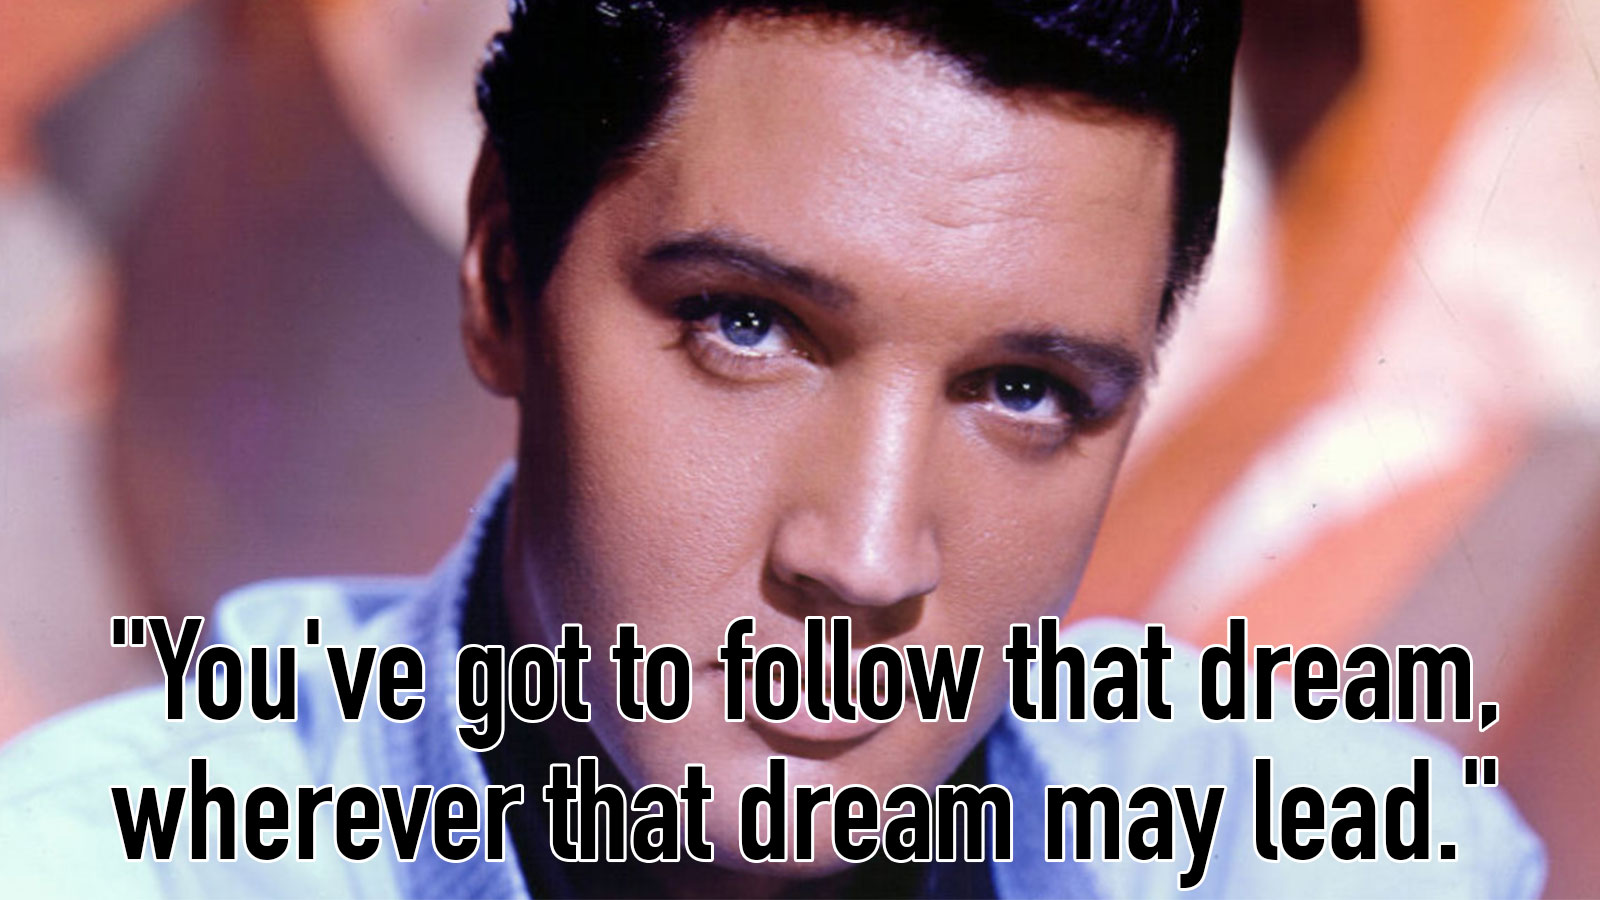 Can You Guess the Elvis Presley Song This Lyric Is From? Quiz 41